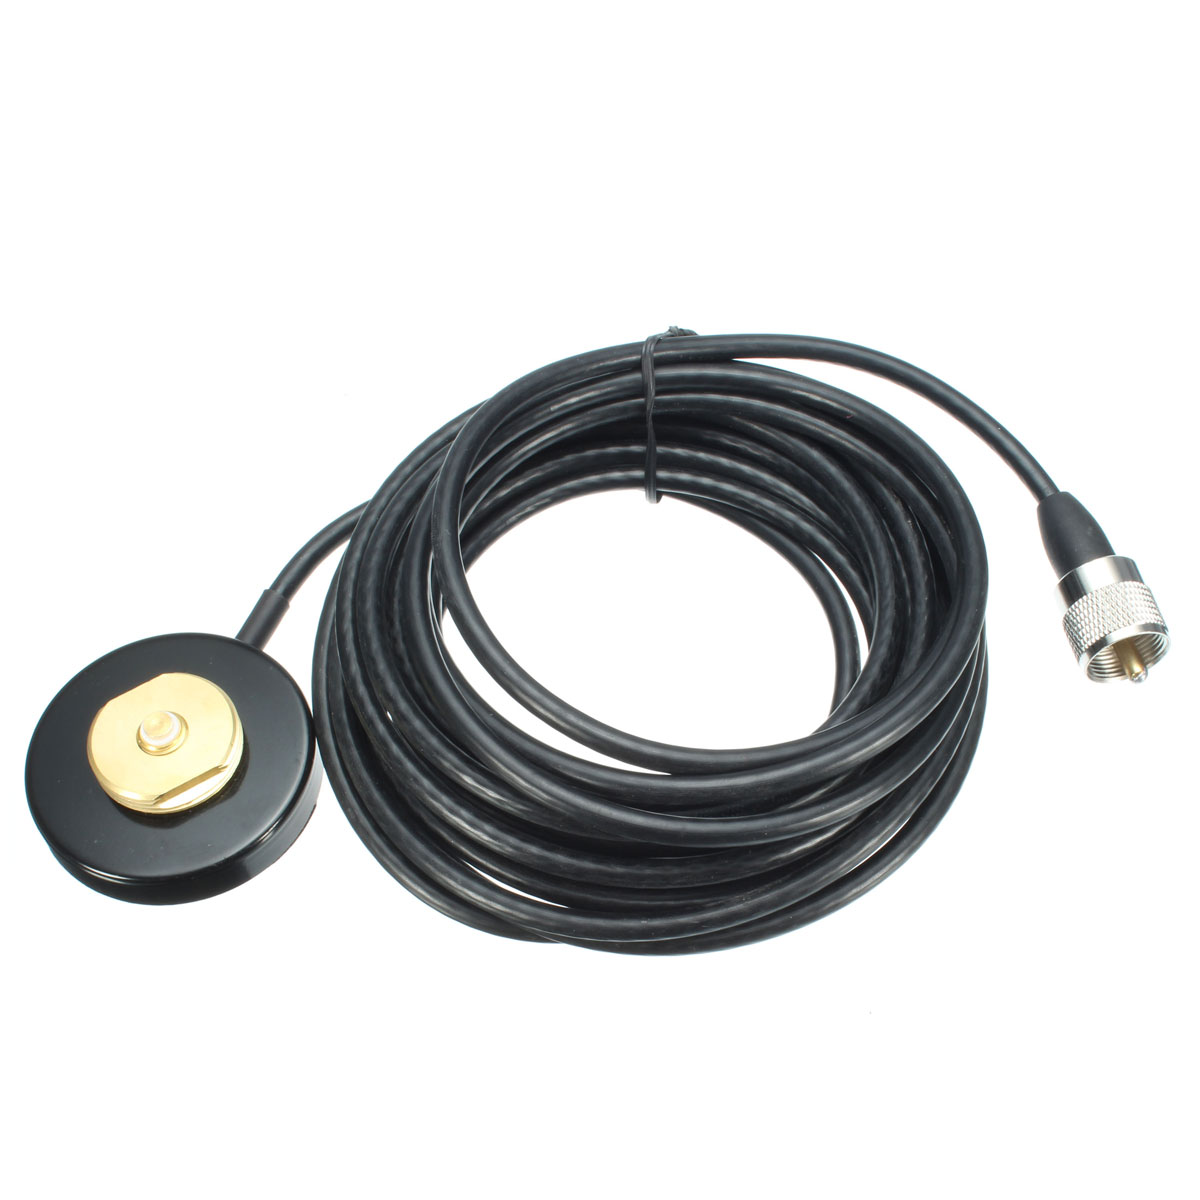 

NMO Mount Magnetic Base for Bus Taxi Mobile Radio Antenna 5M RG-58 Cable